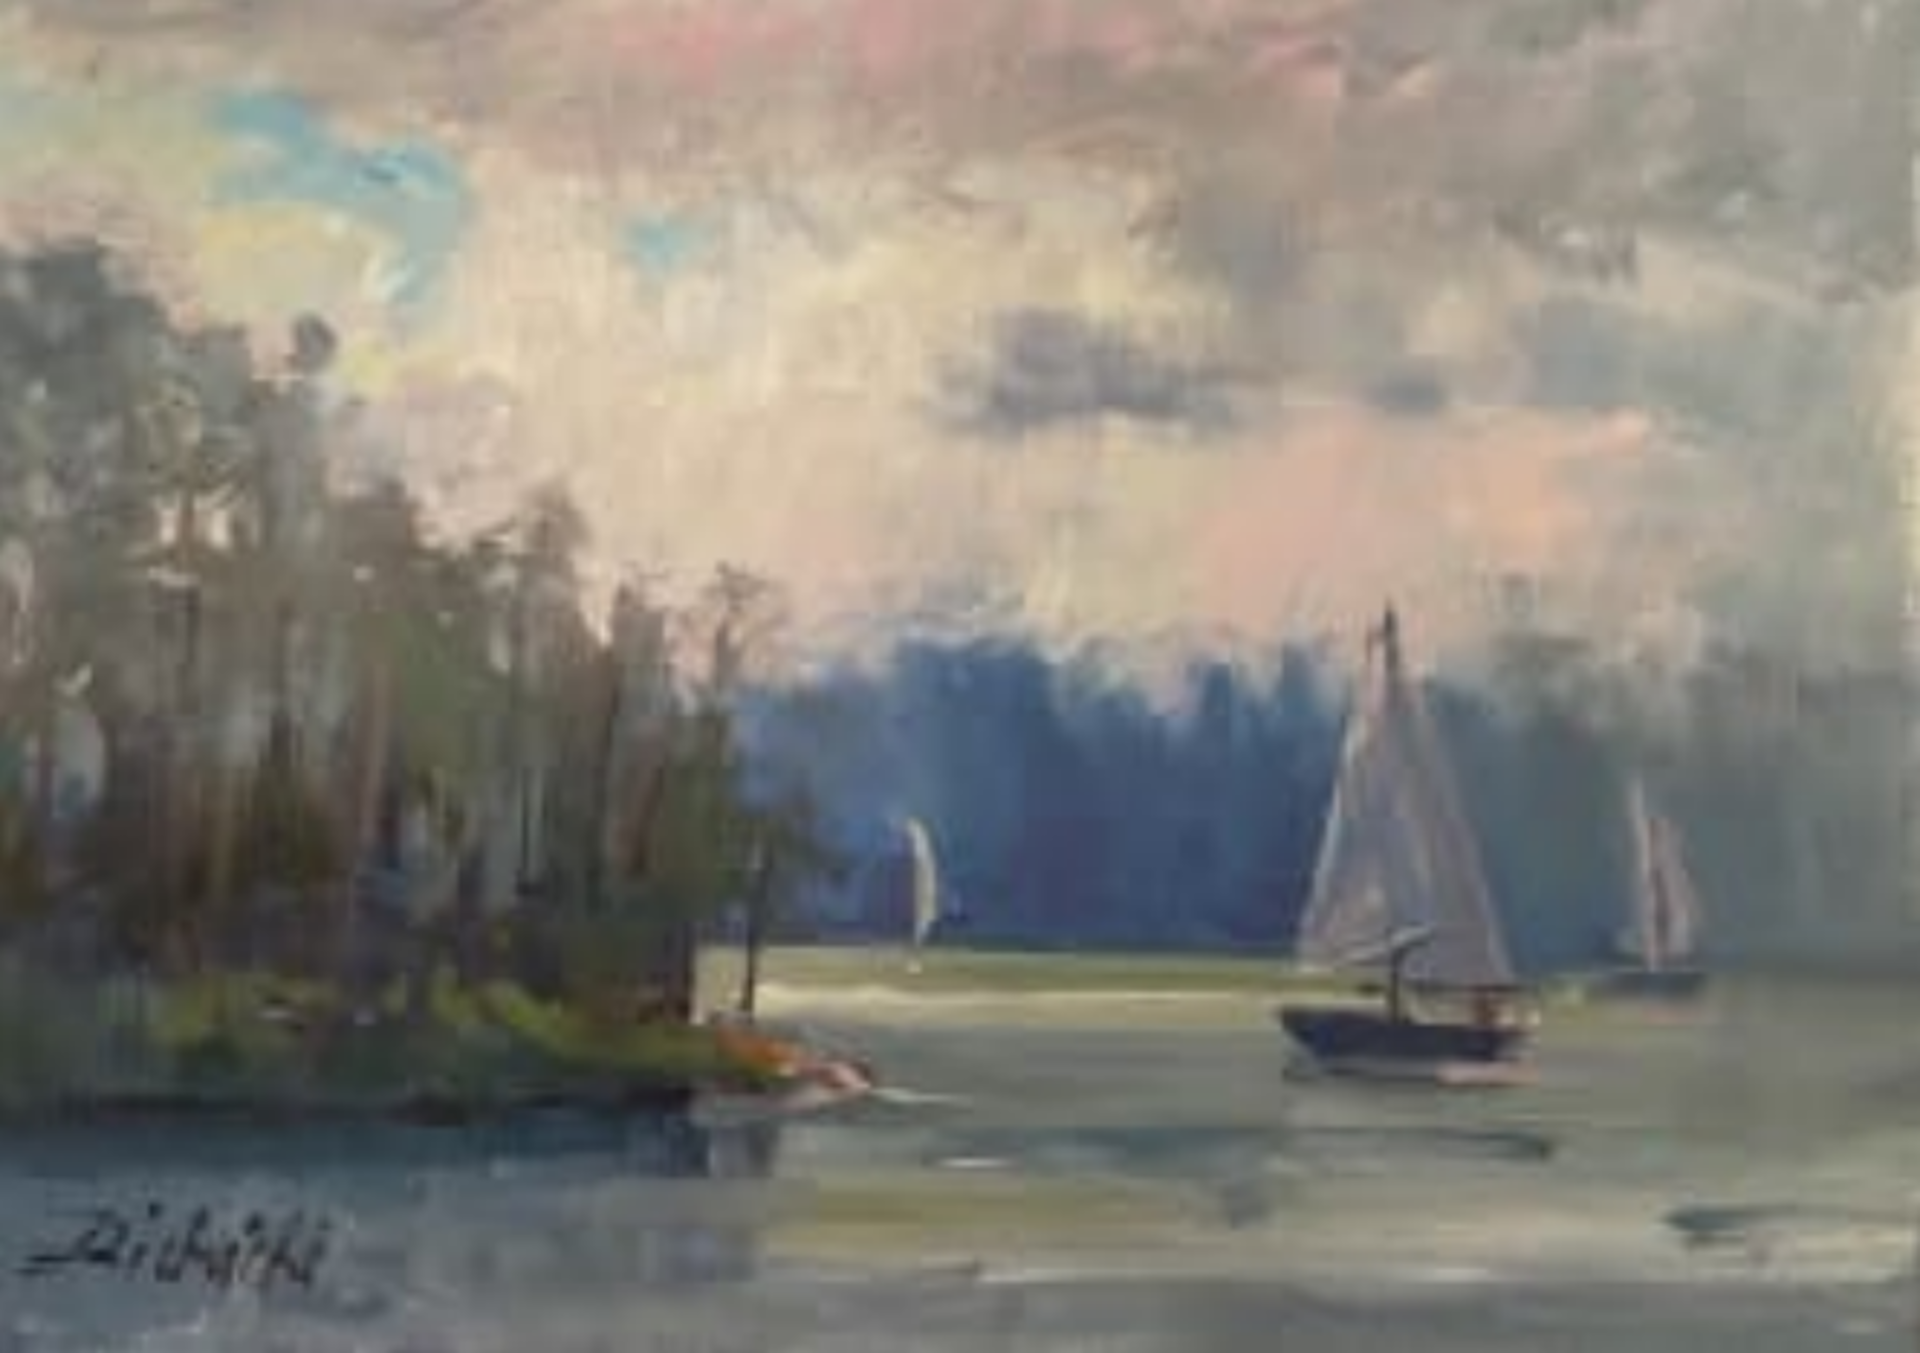 A Day for Sailing by Linda Richichi